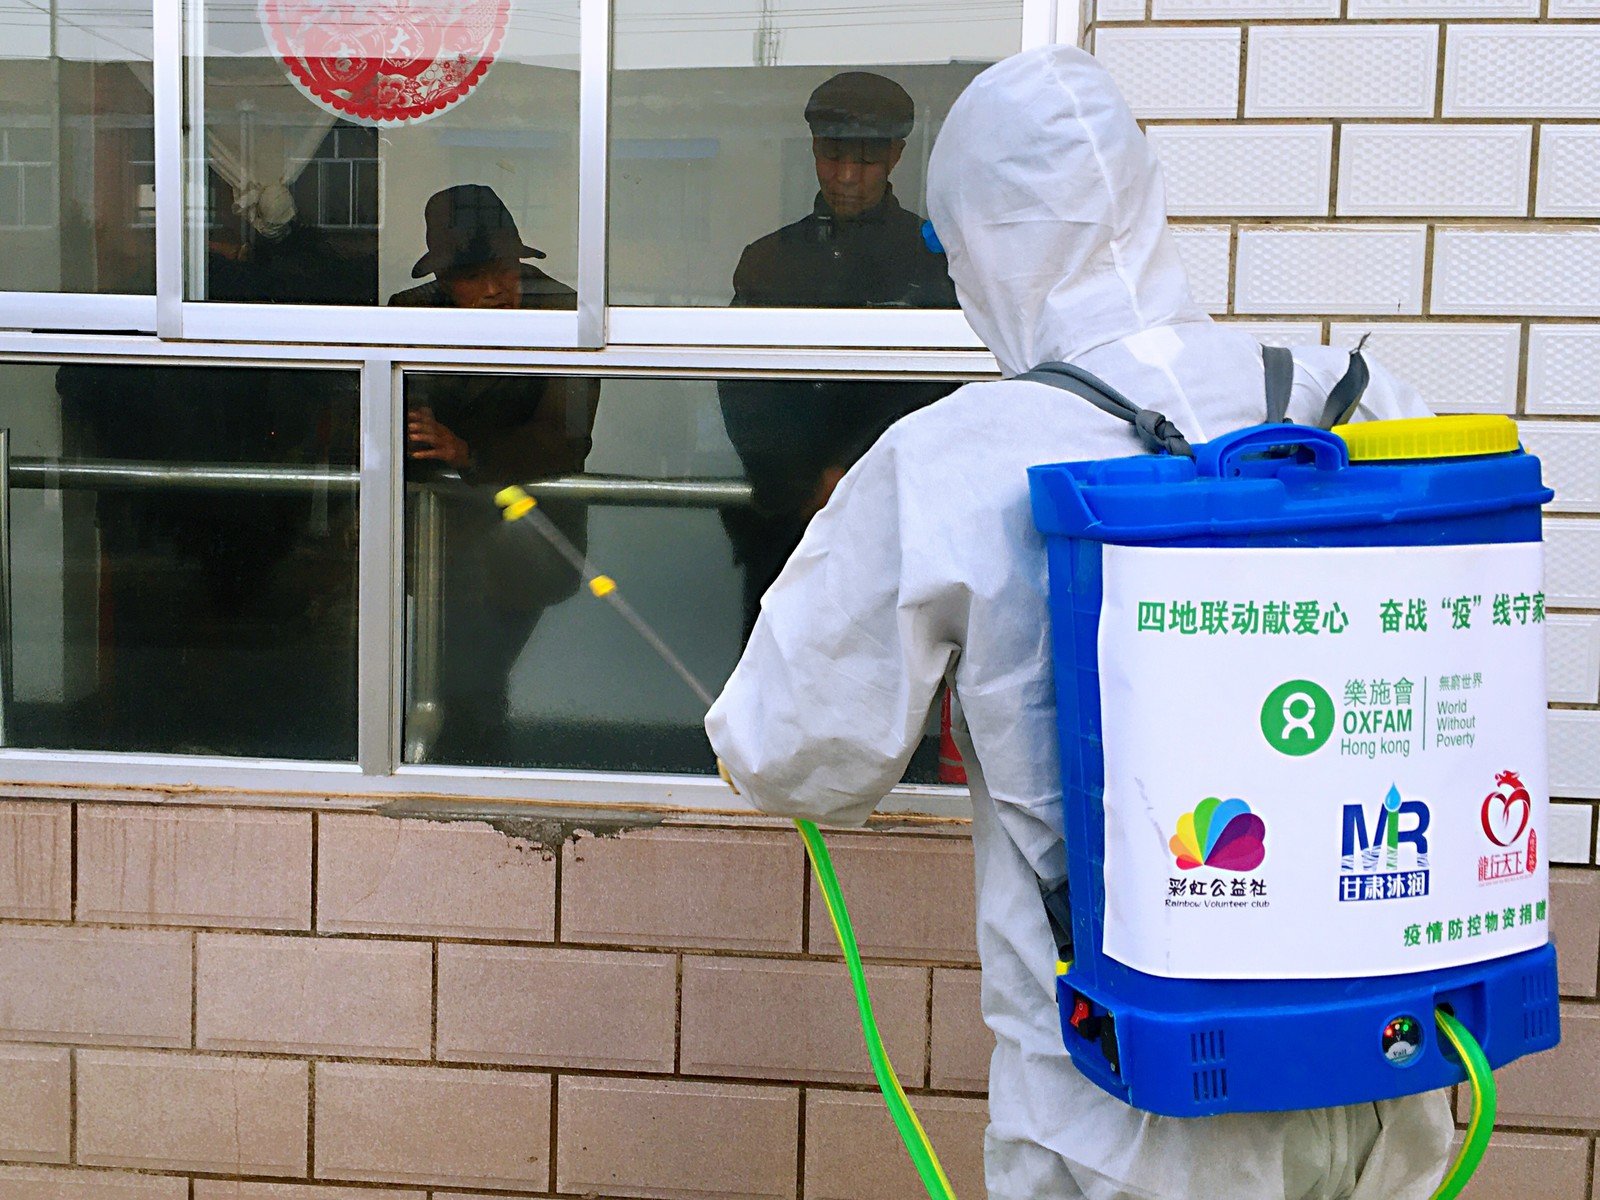 Oxfam’s partners disinfecting a nursing home.